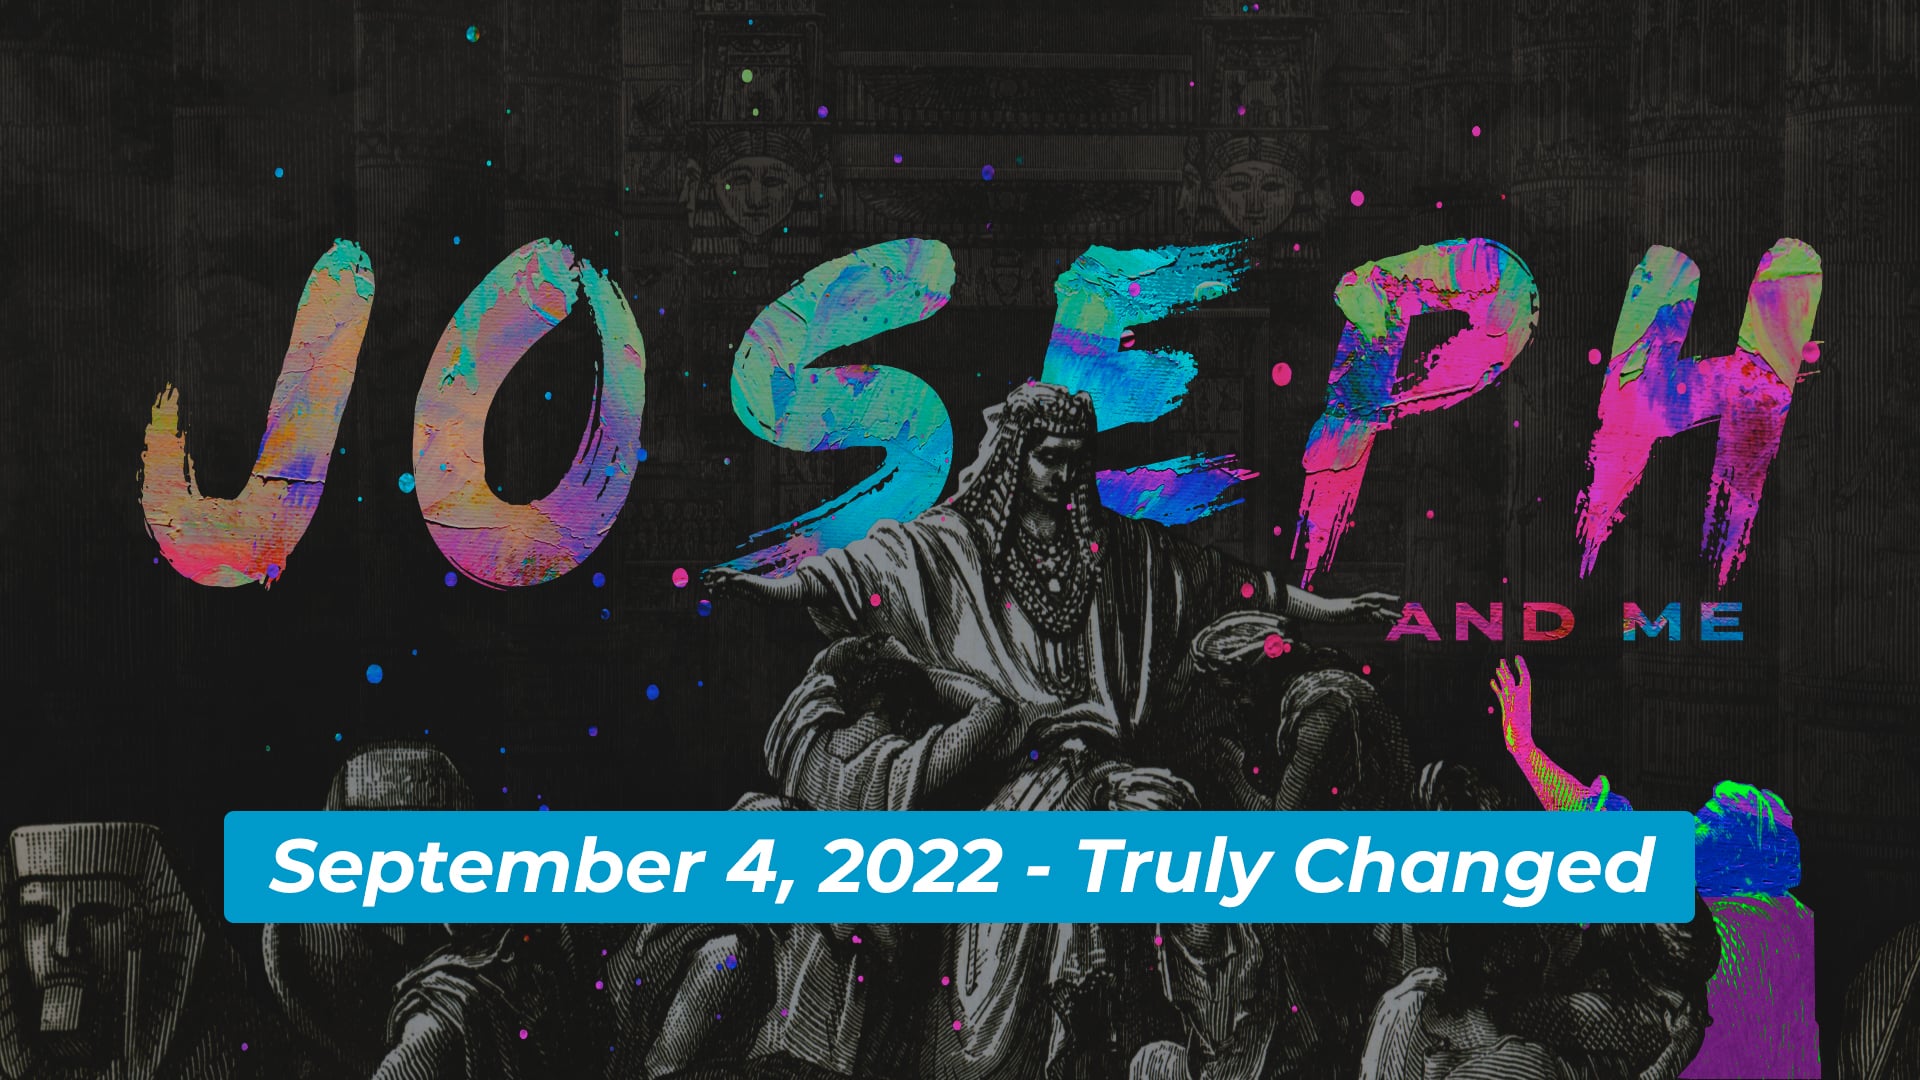 September 4, 2022 - Joseph & Me: Truly Changed